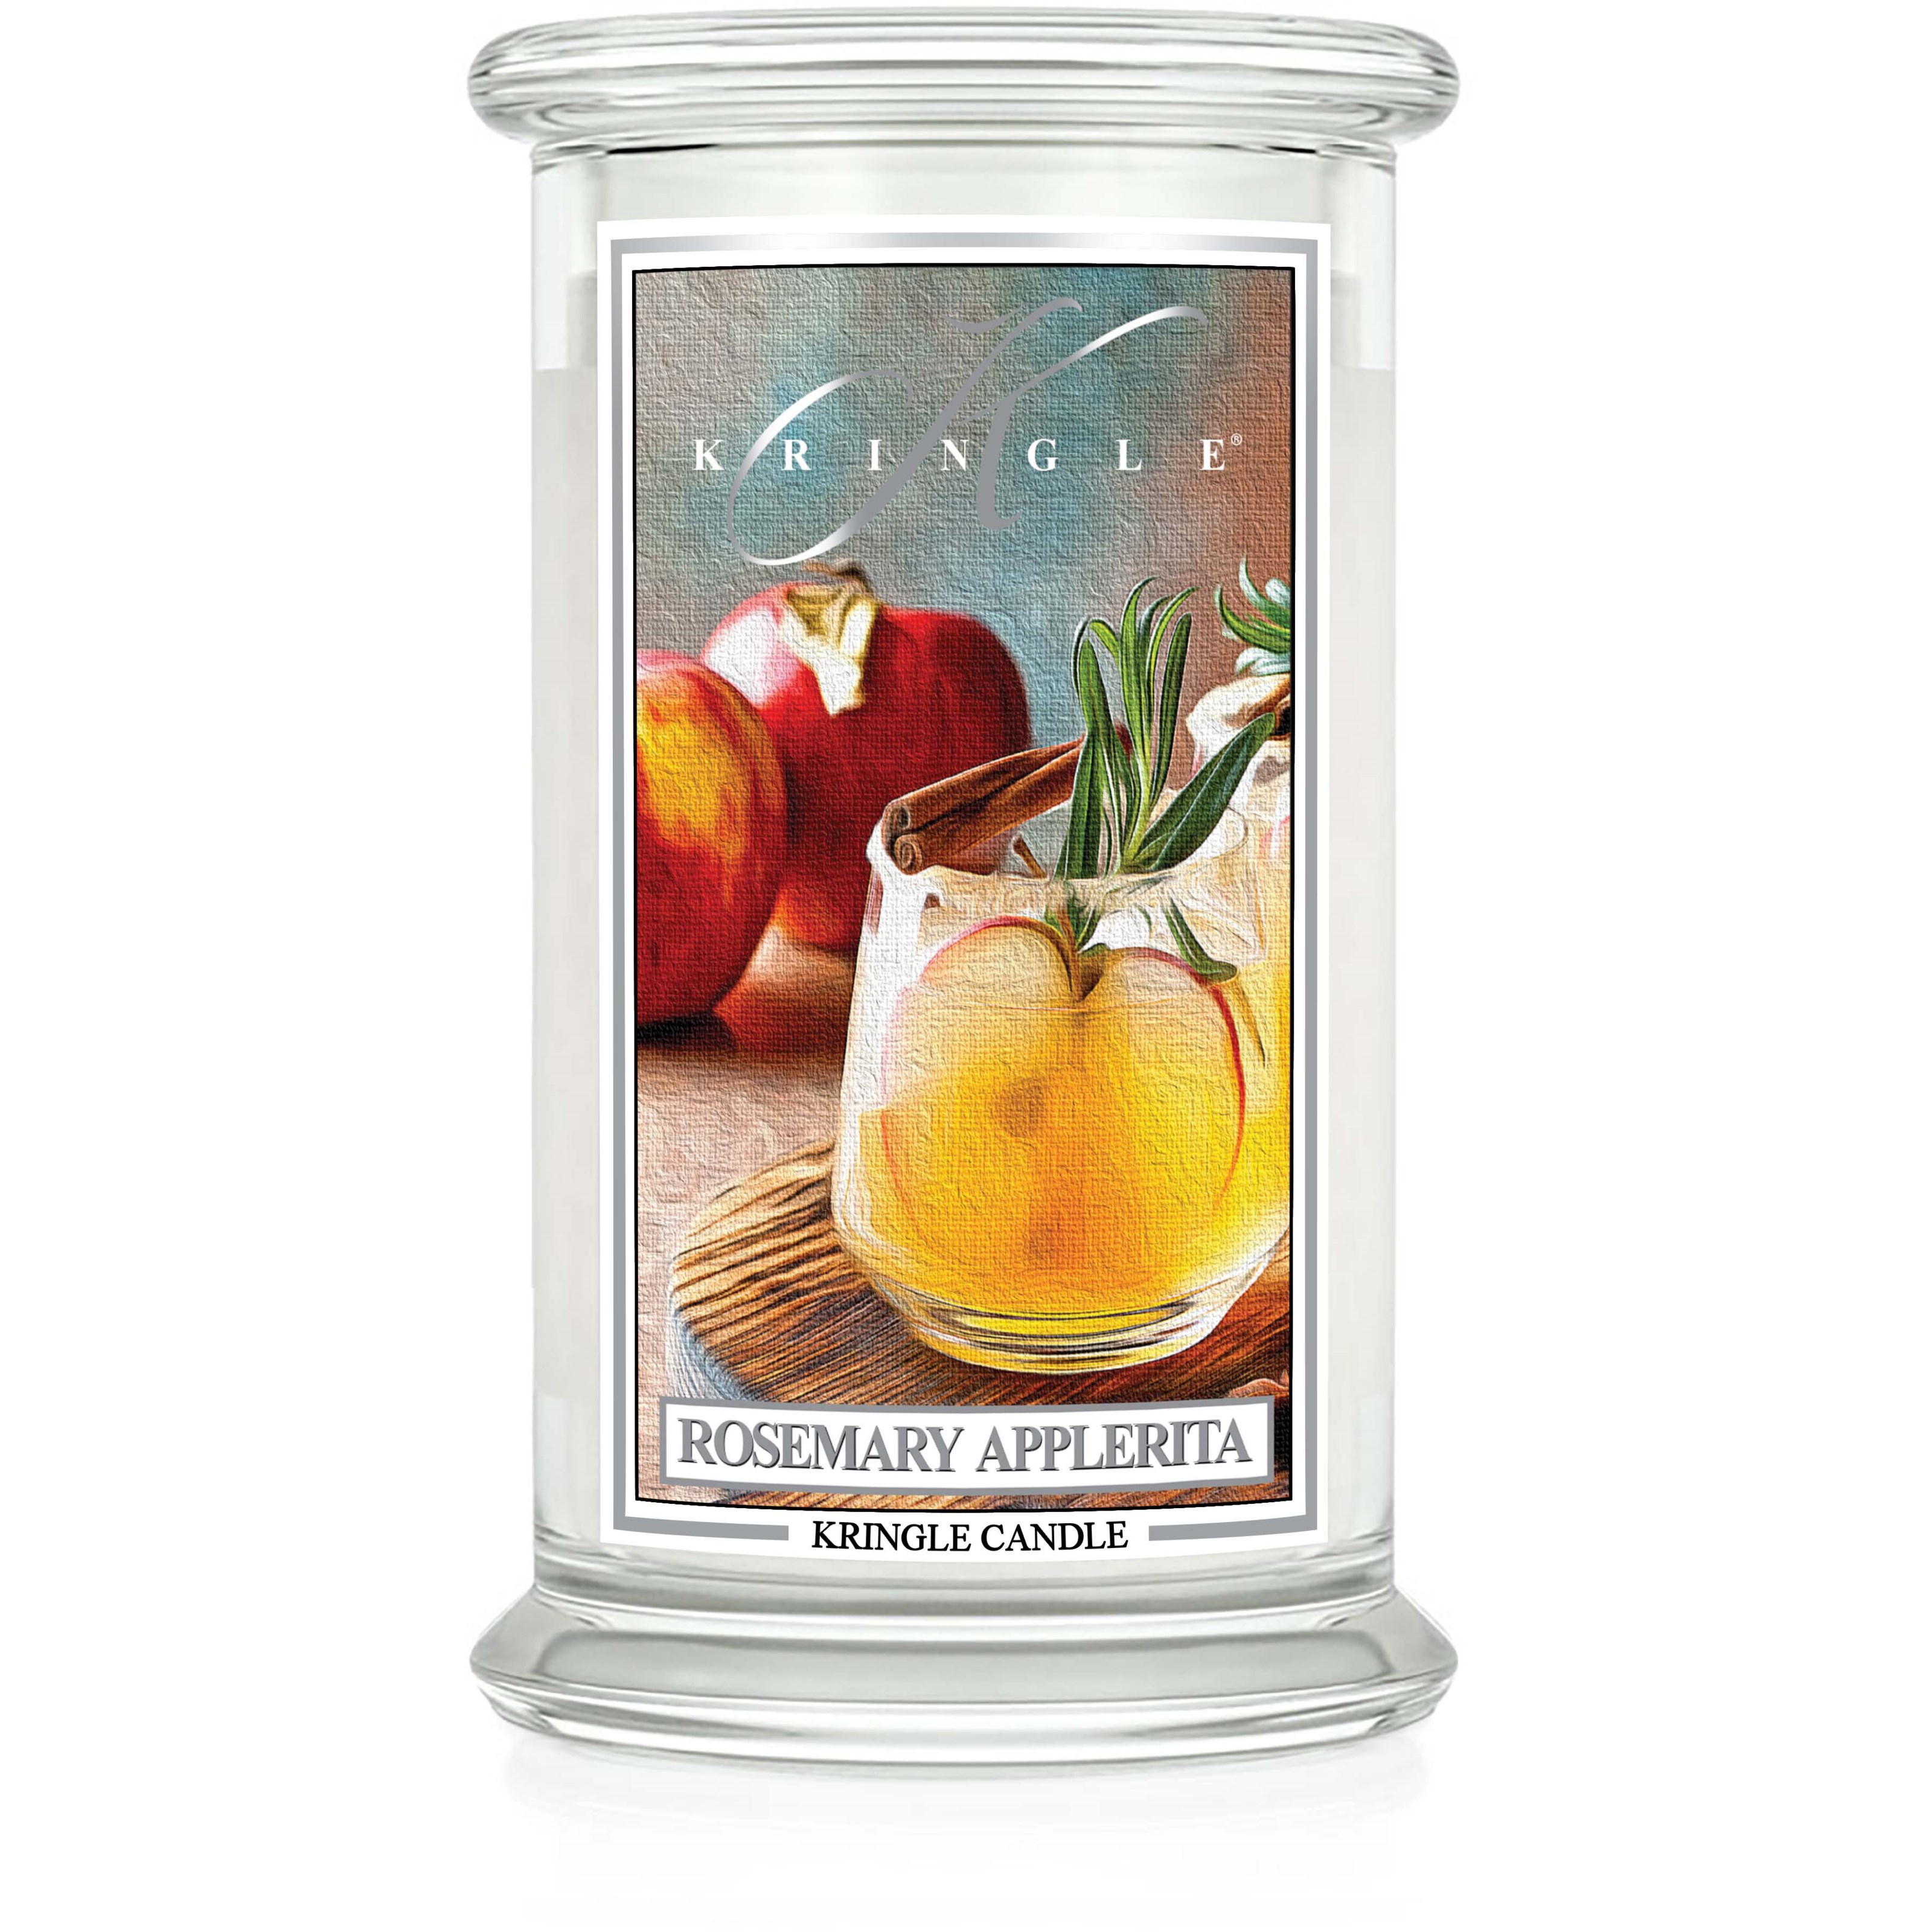 Kringle Candle Rosemary Applerita Scented Candle Large 624 g